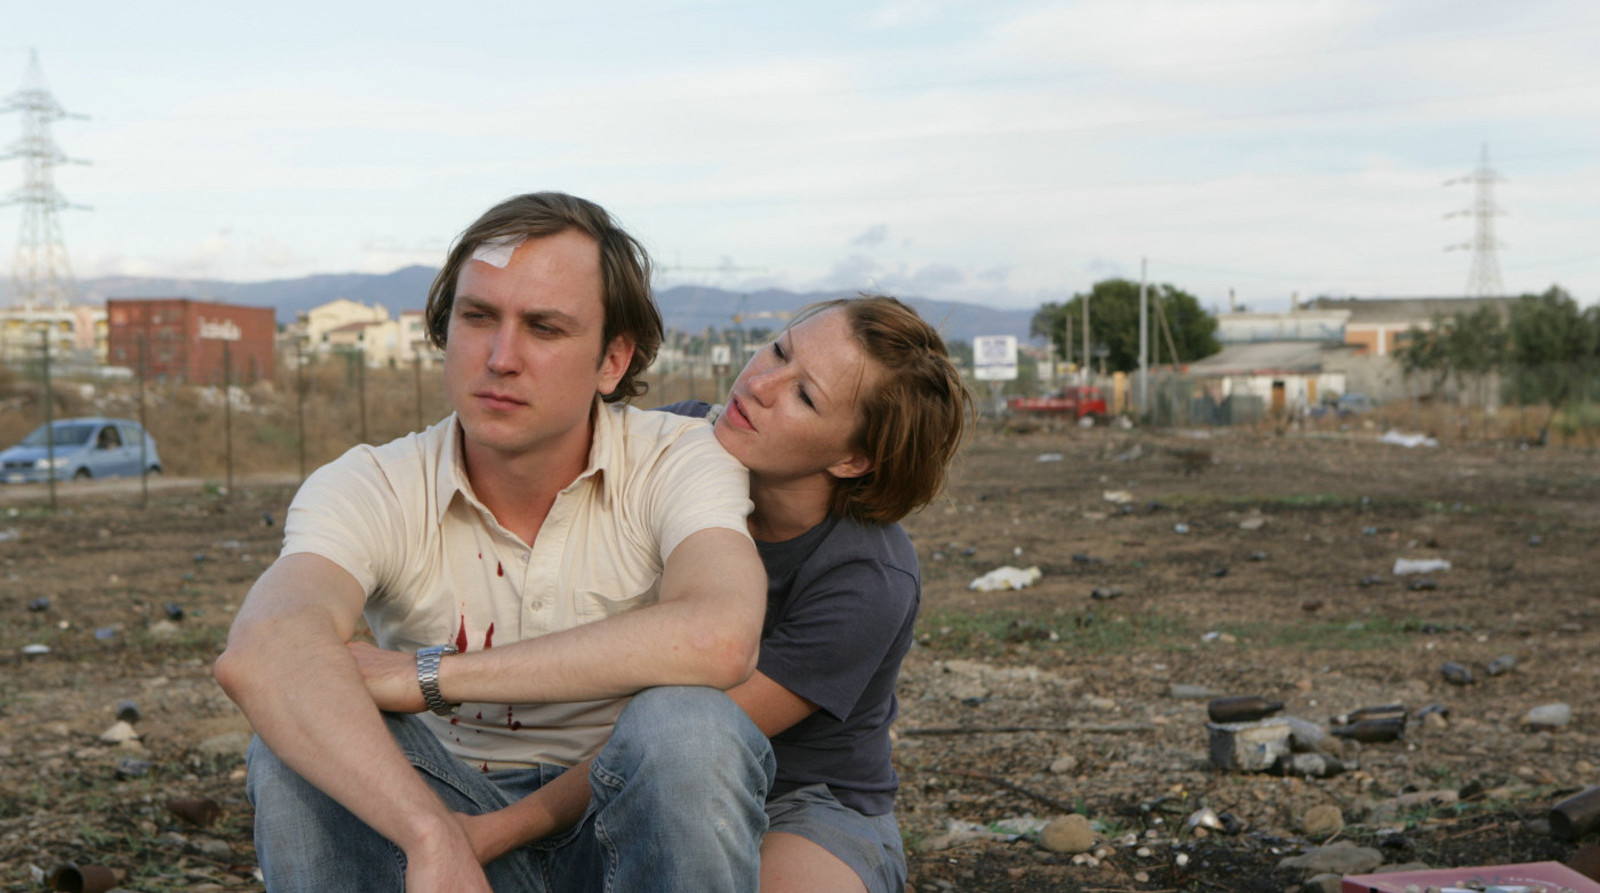 A man with a bandage on his head is embraced by a woman while sitting in a dump lot